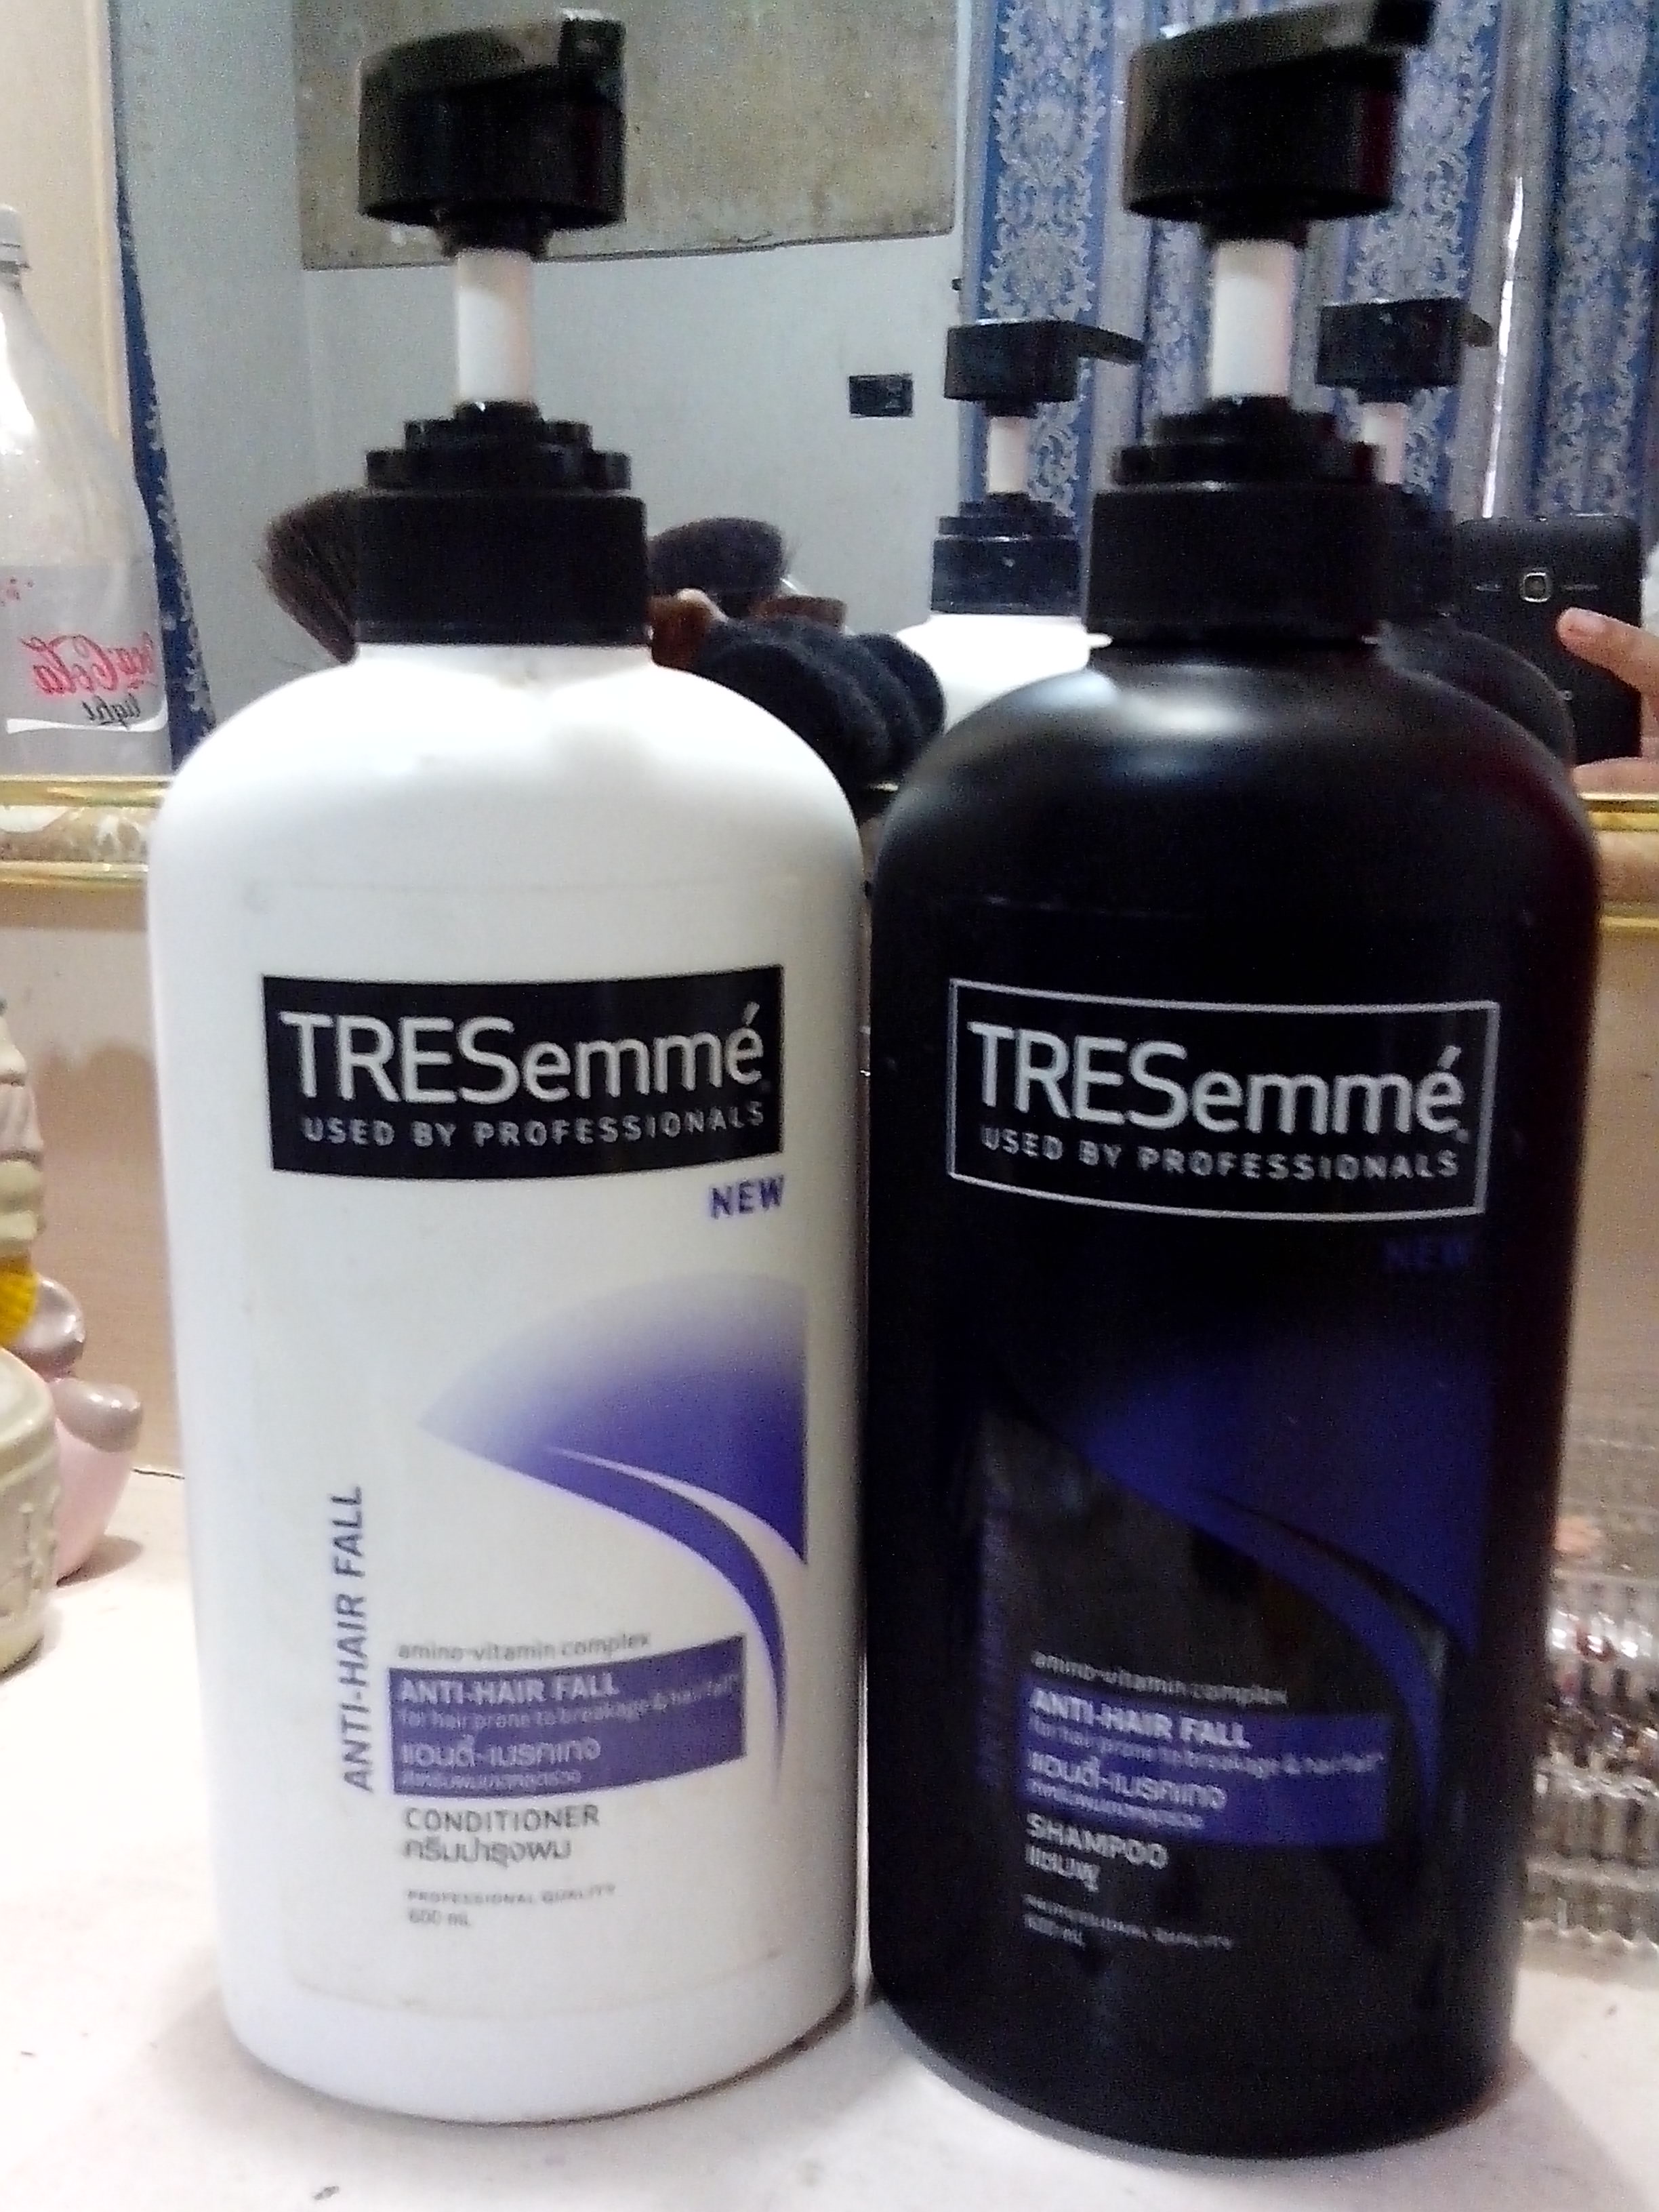 Quick Review: TRESemmé Anti-Hair Fall Shampoo and Conditioner